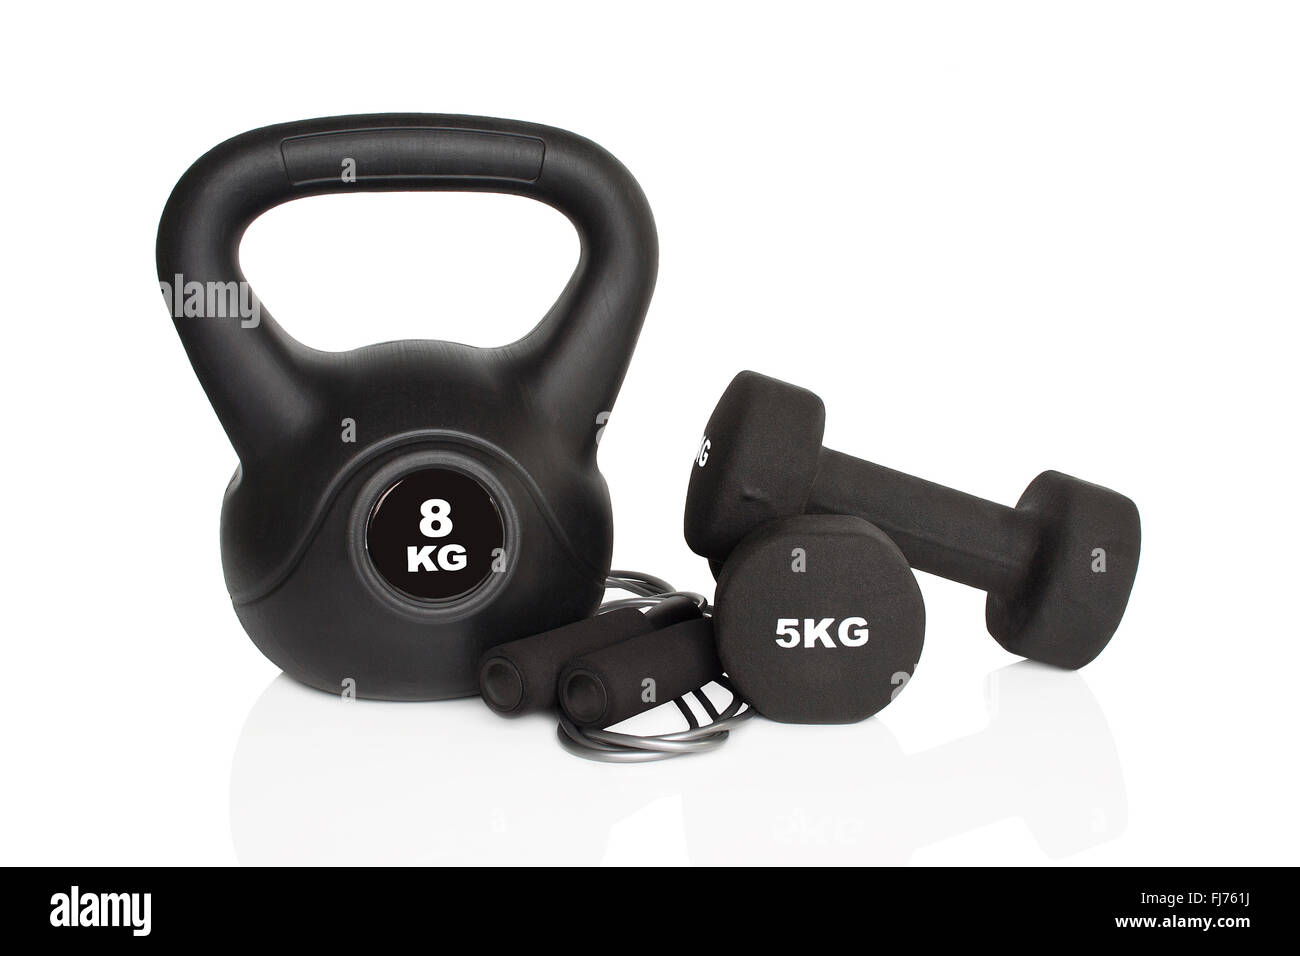 Black dumbbells and kettlebell isolated on white background. Weights for a fitness training. Stock Photo